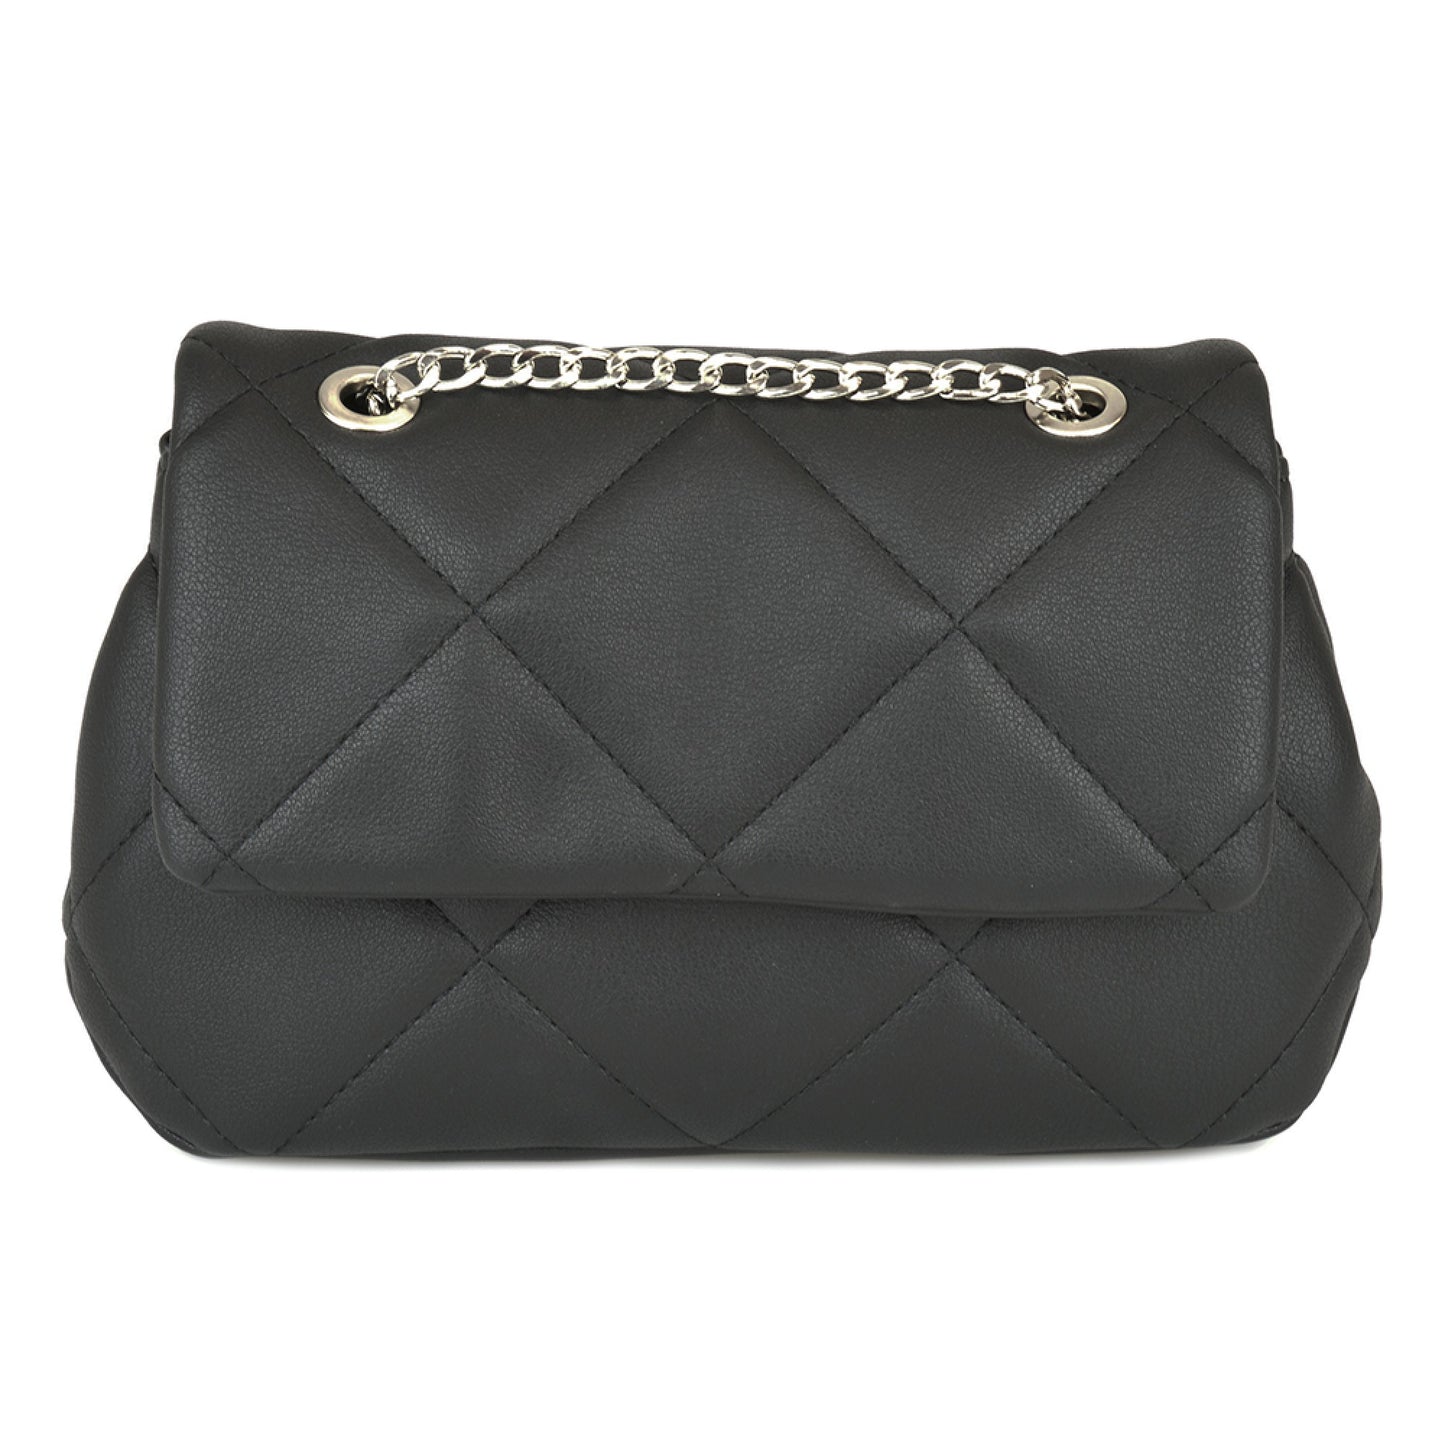 Ladies Versatile Black Quilted Cross Body Bag with Adjustable Chain Strap